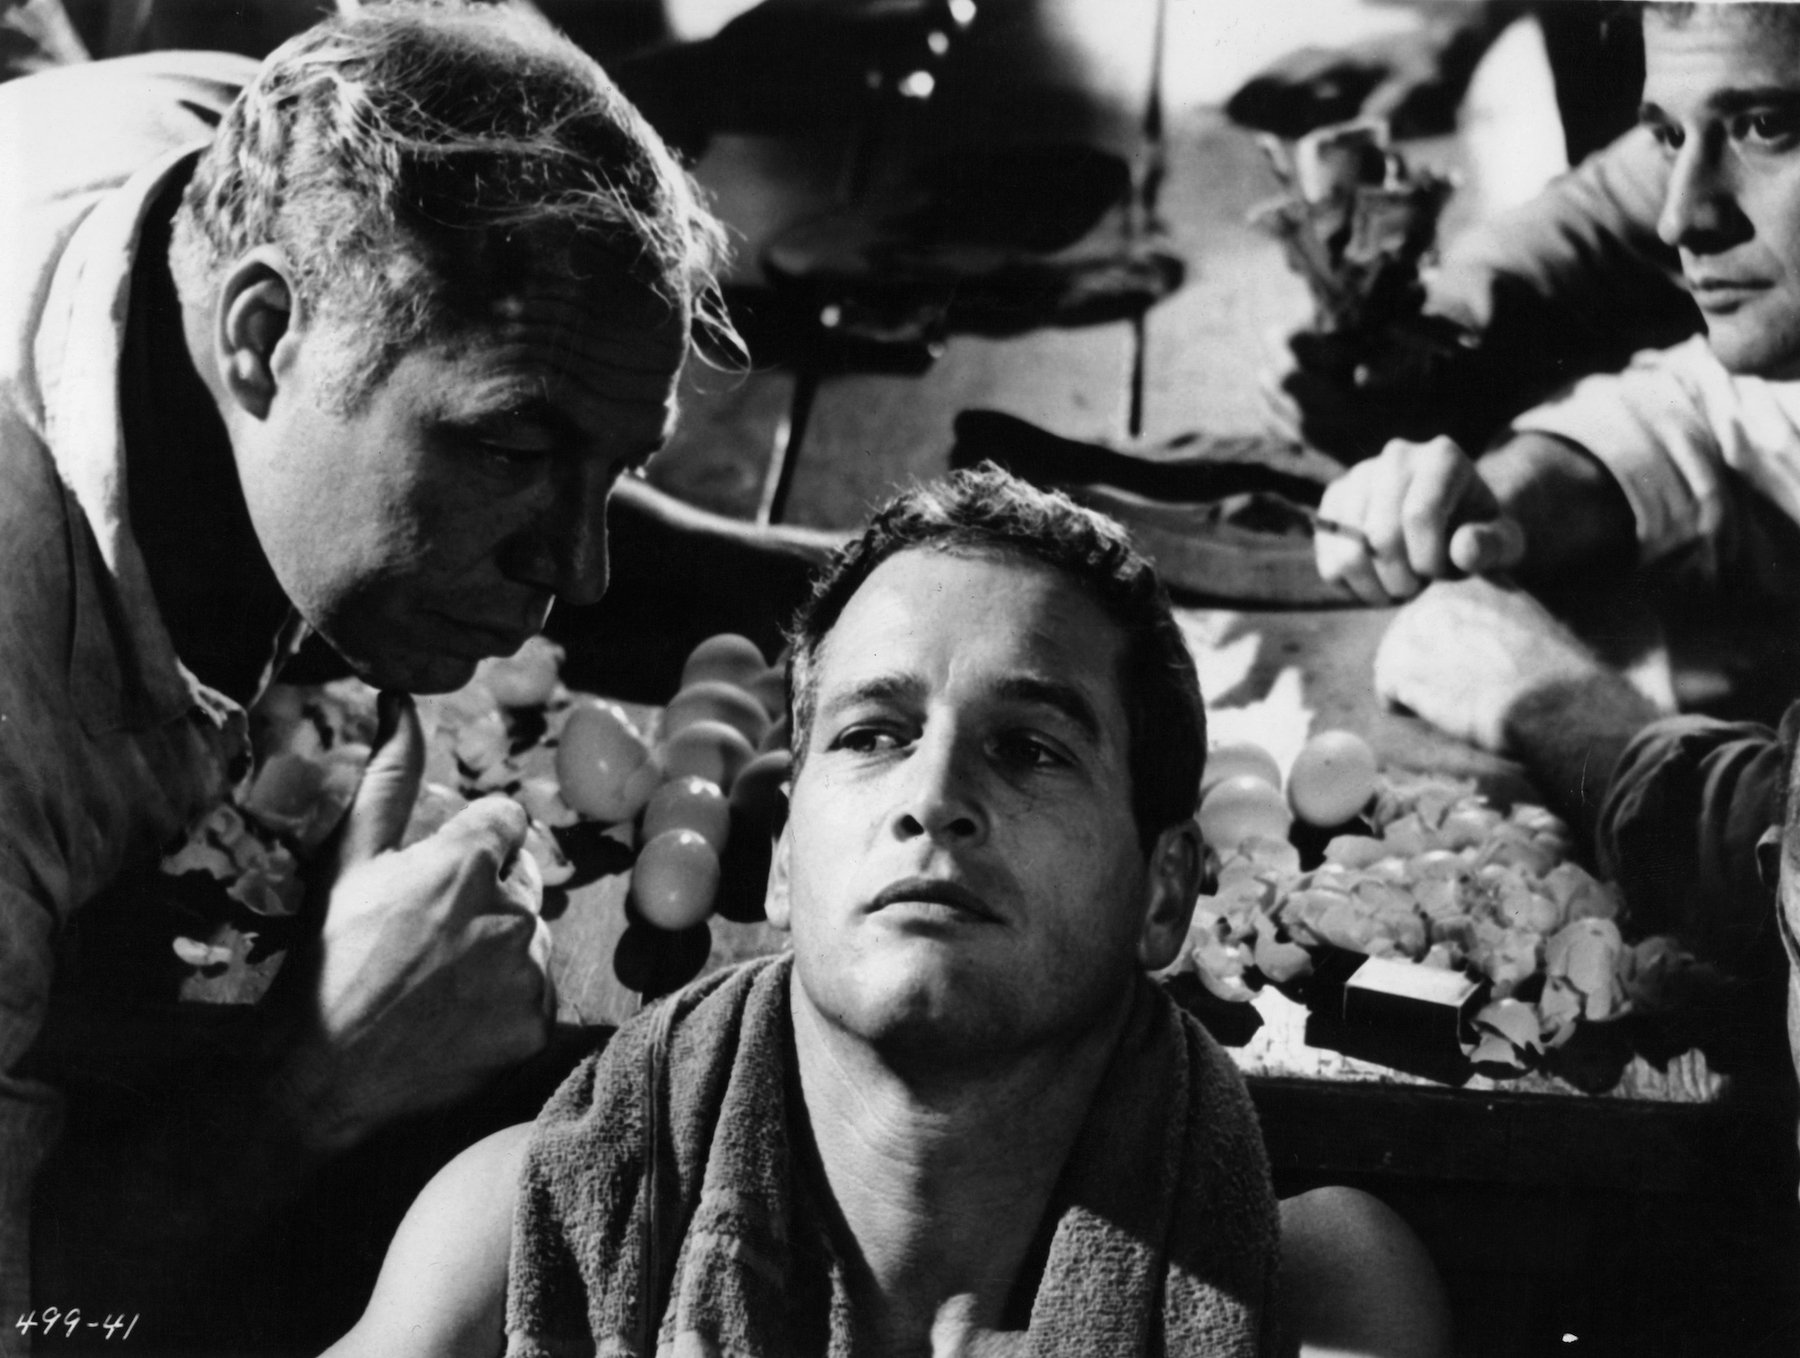 George Kennedy leaning into Paul Newman in a scene from the film 'Cool Hand Luke'